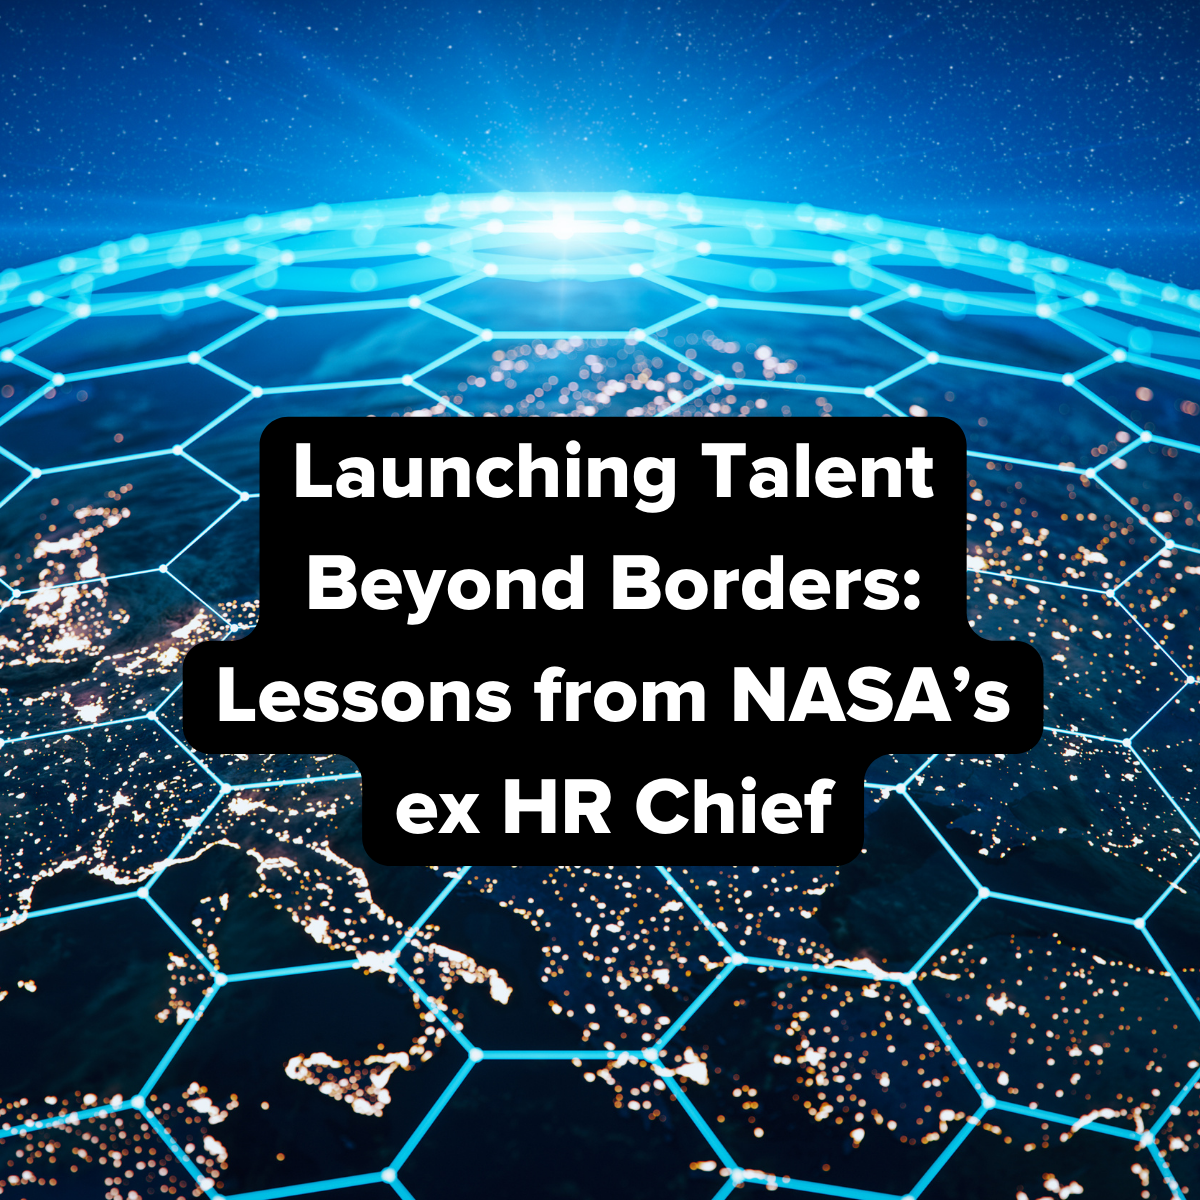 Launching Talent Beyond Borders: Lessons from NASA’s ex HR Chief